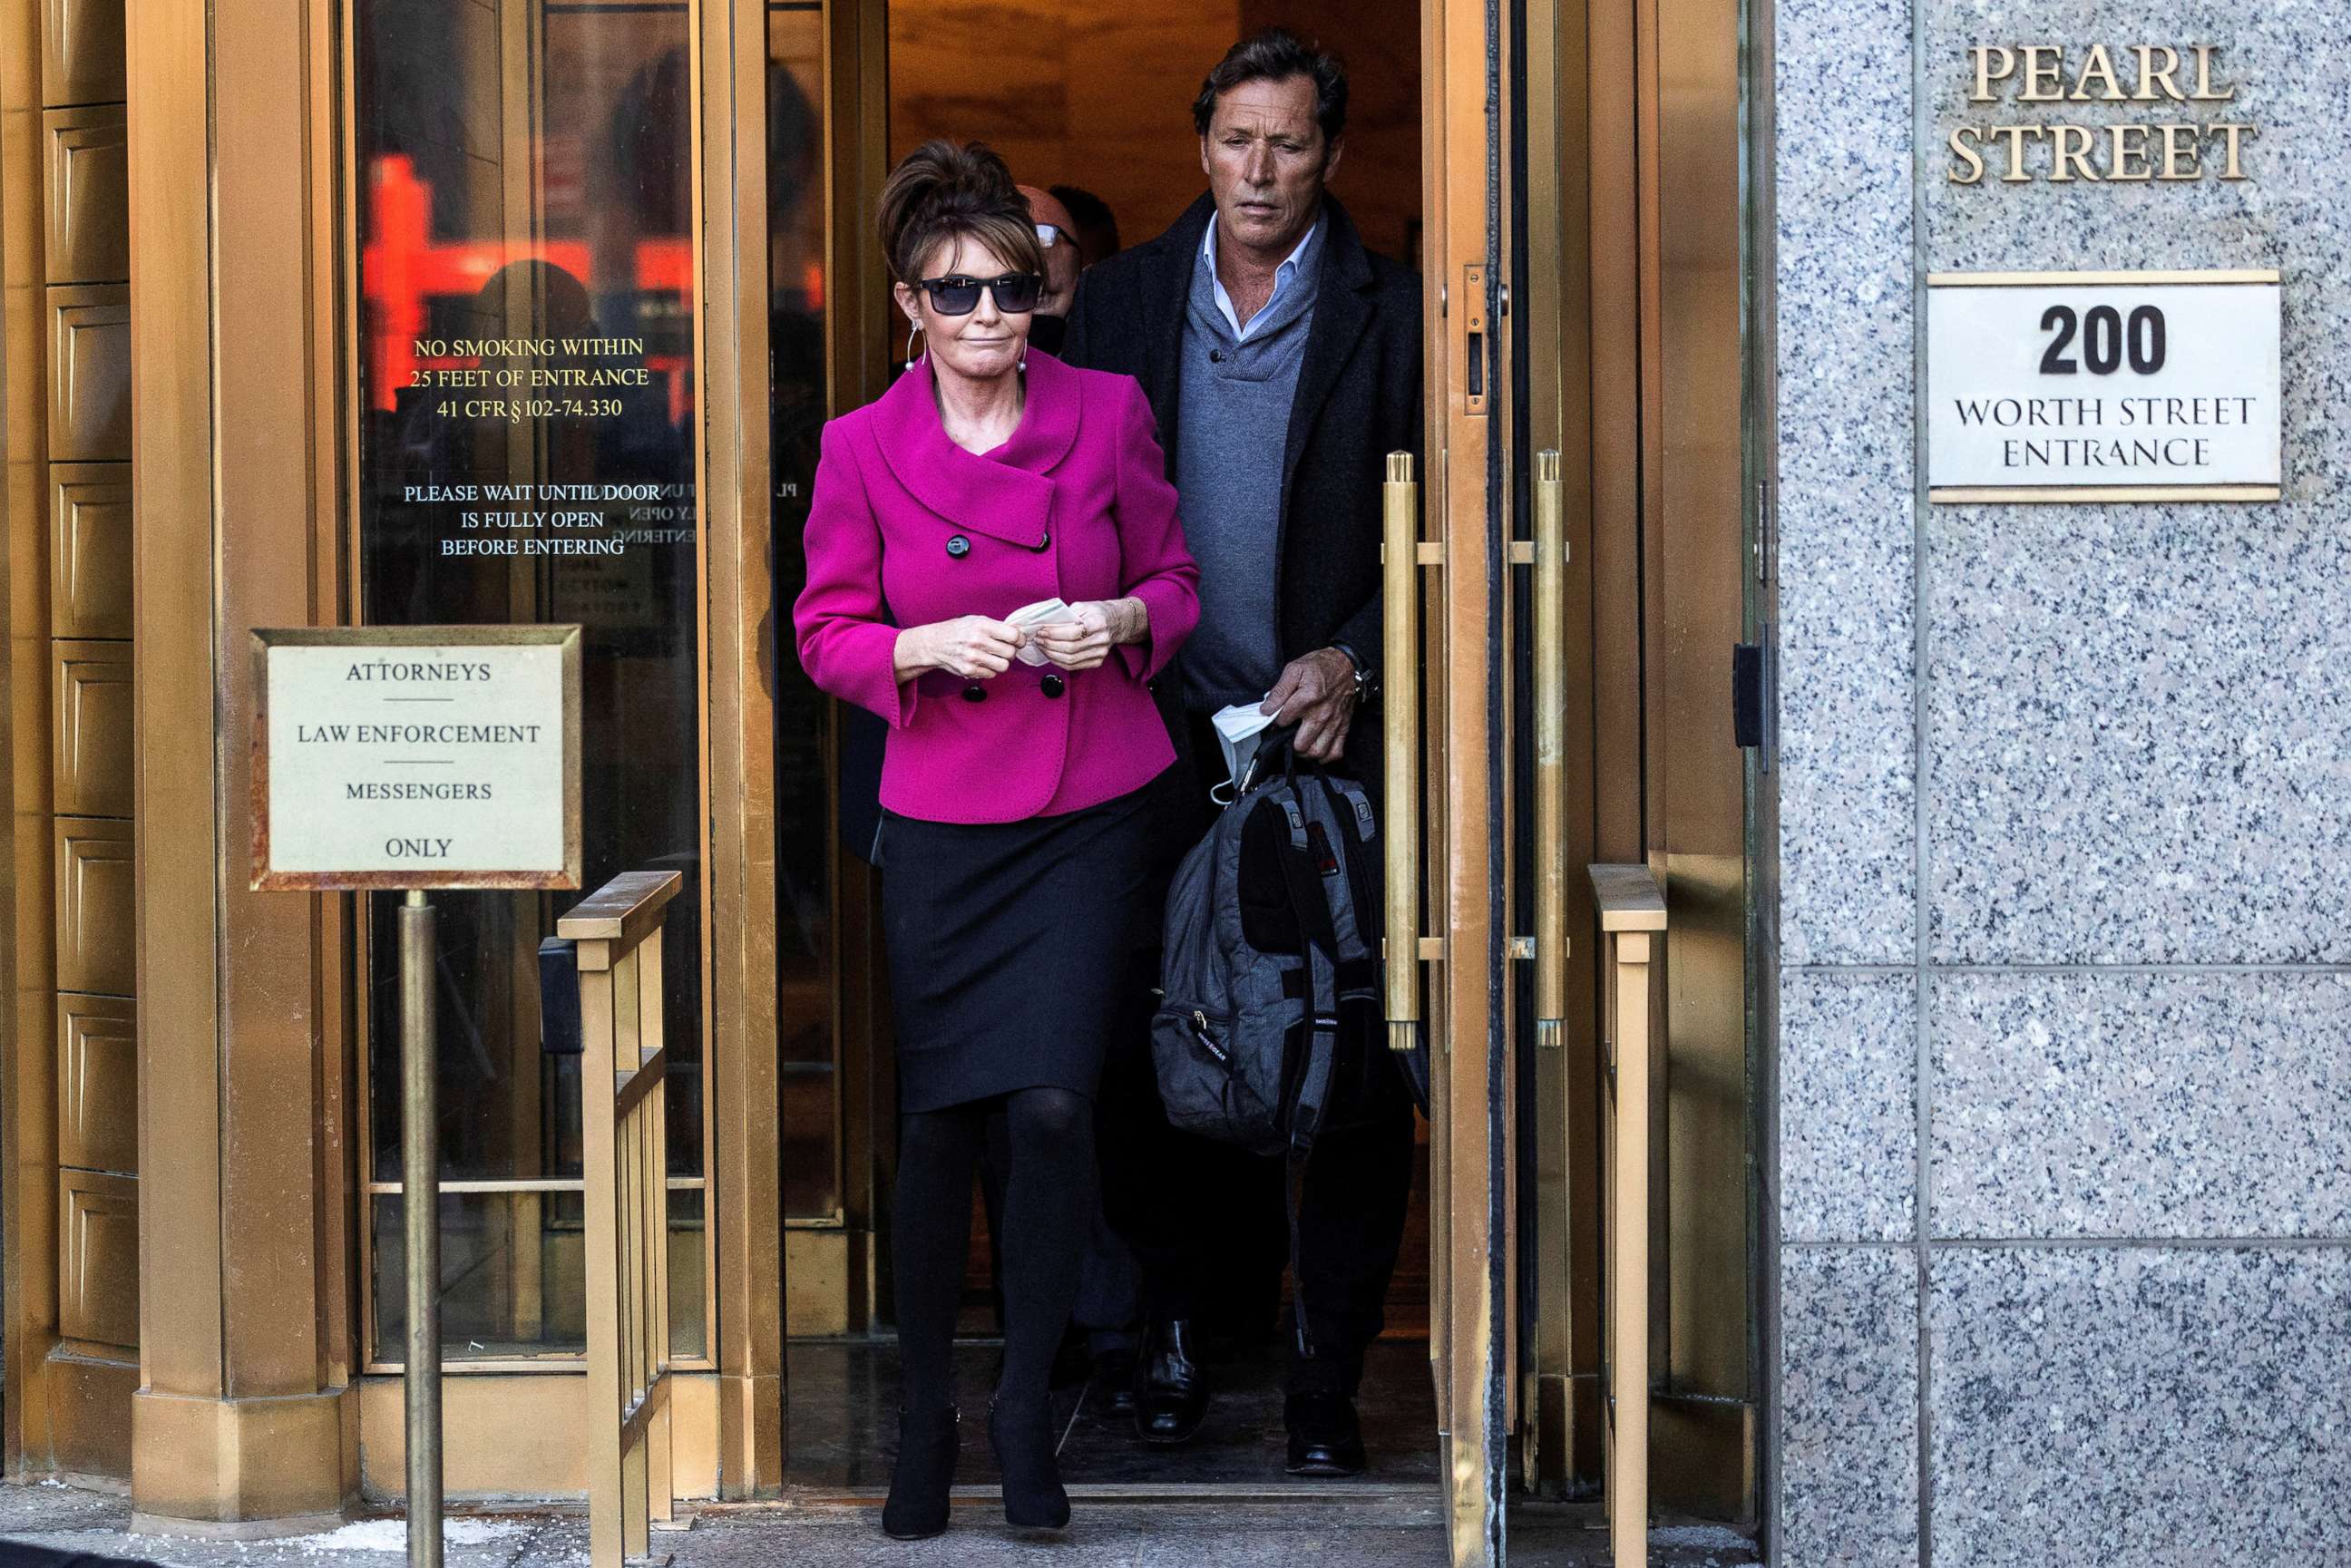 PHOTO: Sarah Palin departs with former NHL hockey player Ron Duguay the United States Courthouse in New York City during her defamation lawsuit against the New York Times, Feb. 9, 2022.